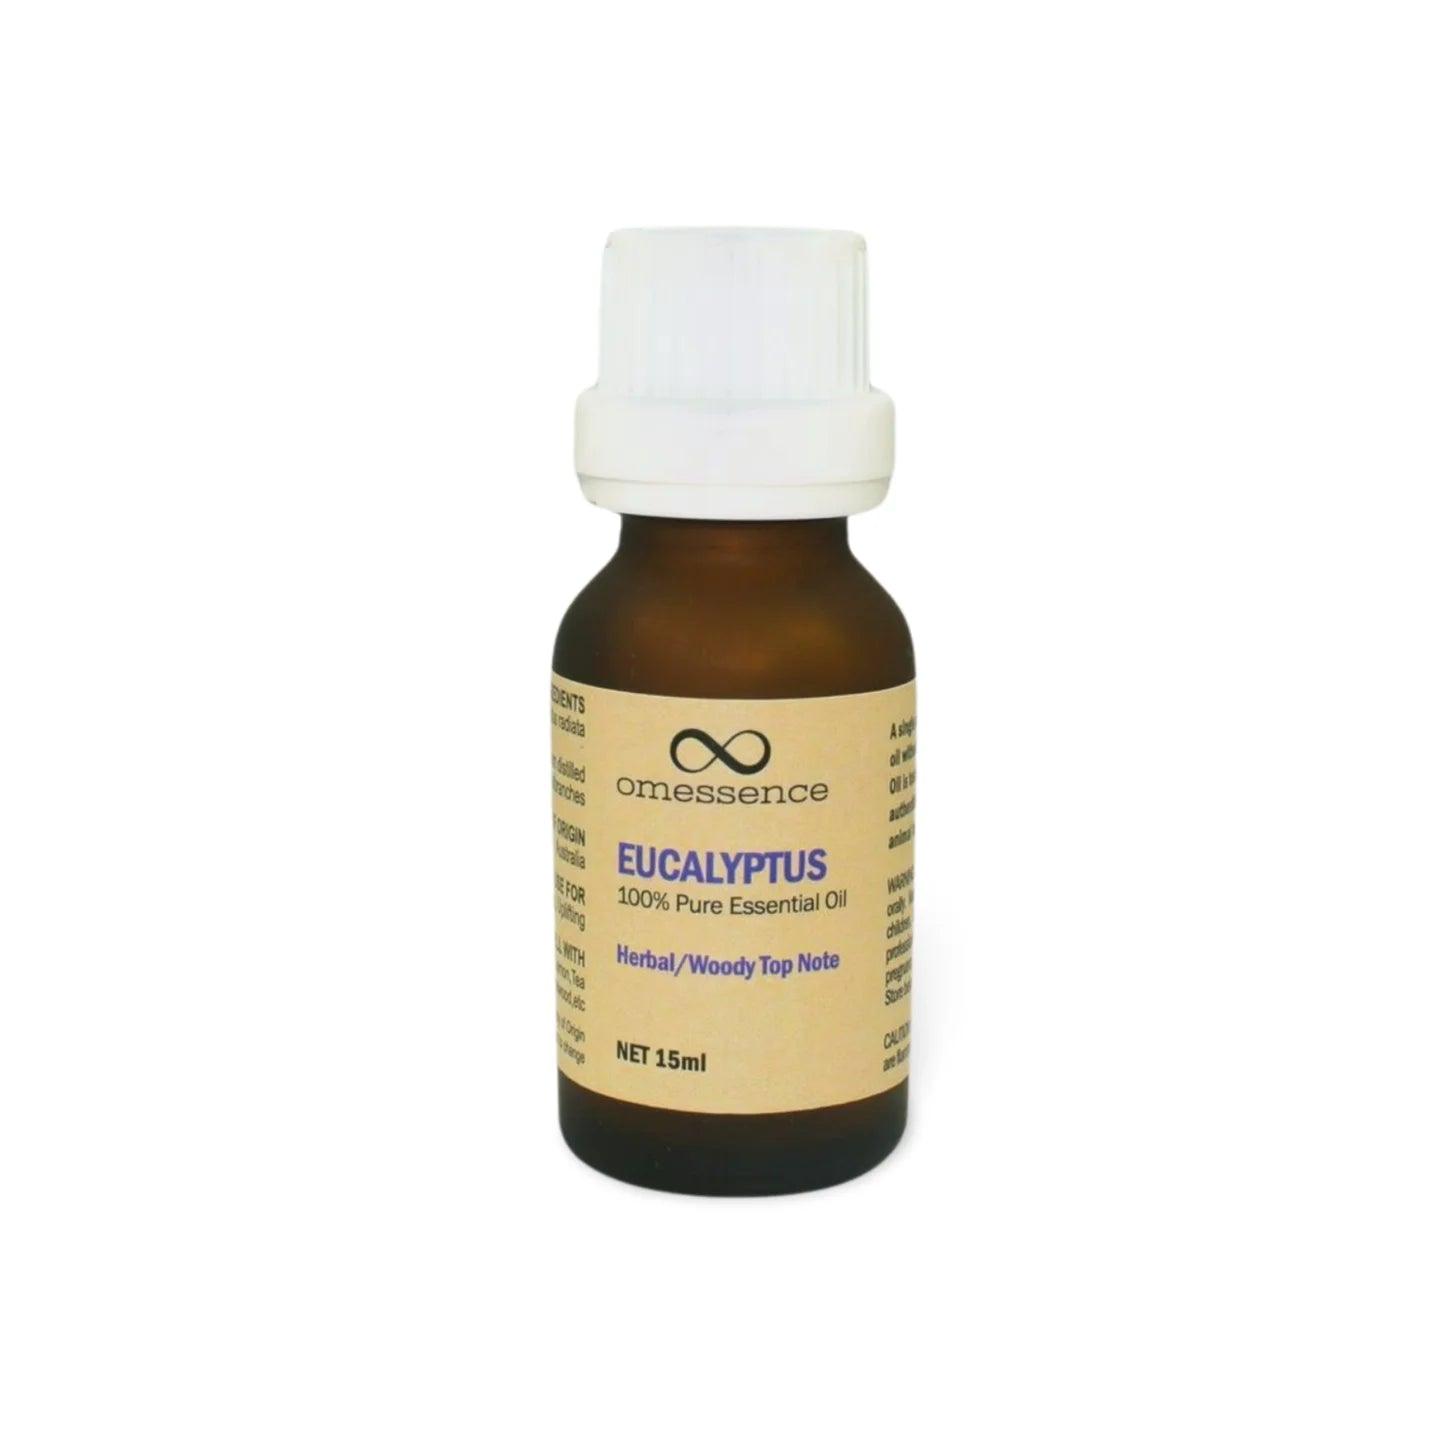 Omessence Eucalyptus Pure Essential Oil 15ml by Love Nature